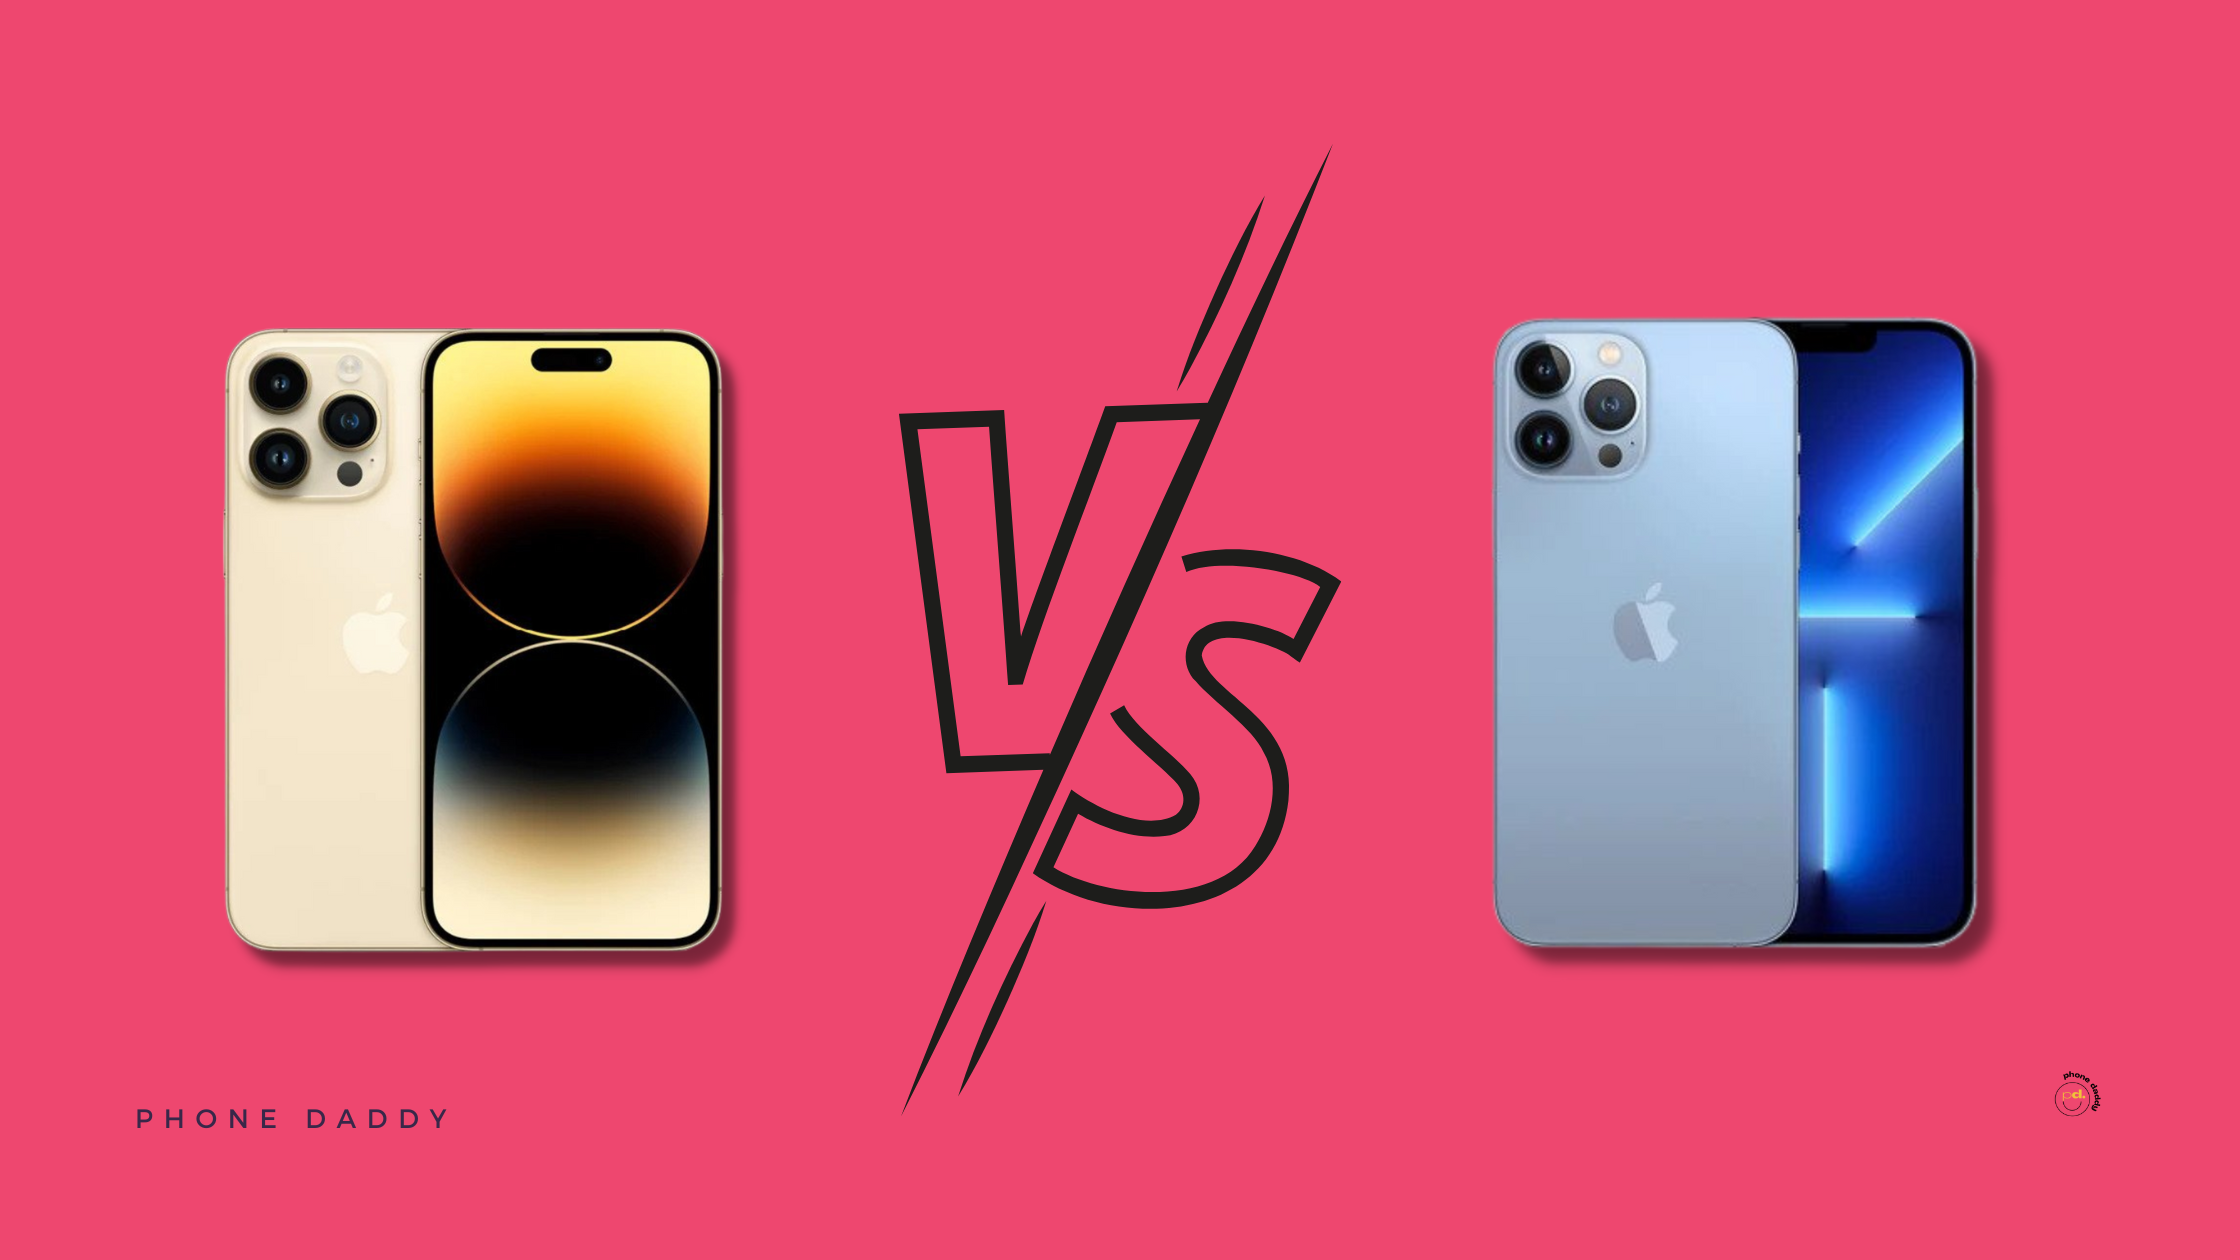 iPhone 12 Pro vs iPhone 13 Pro: Which Apple smartphone should you buy?